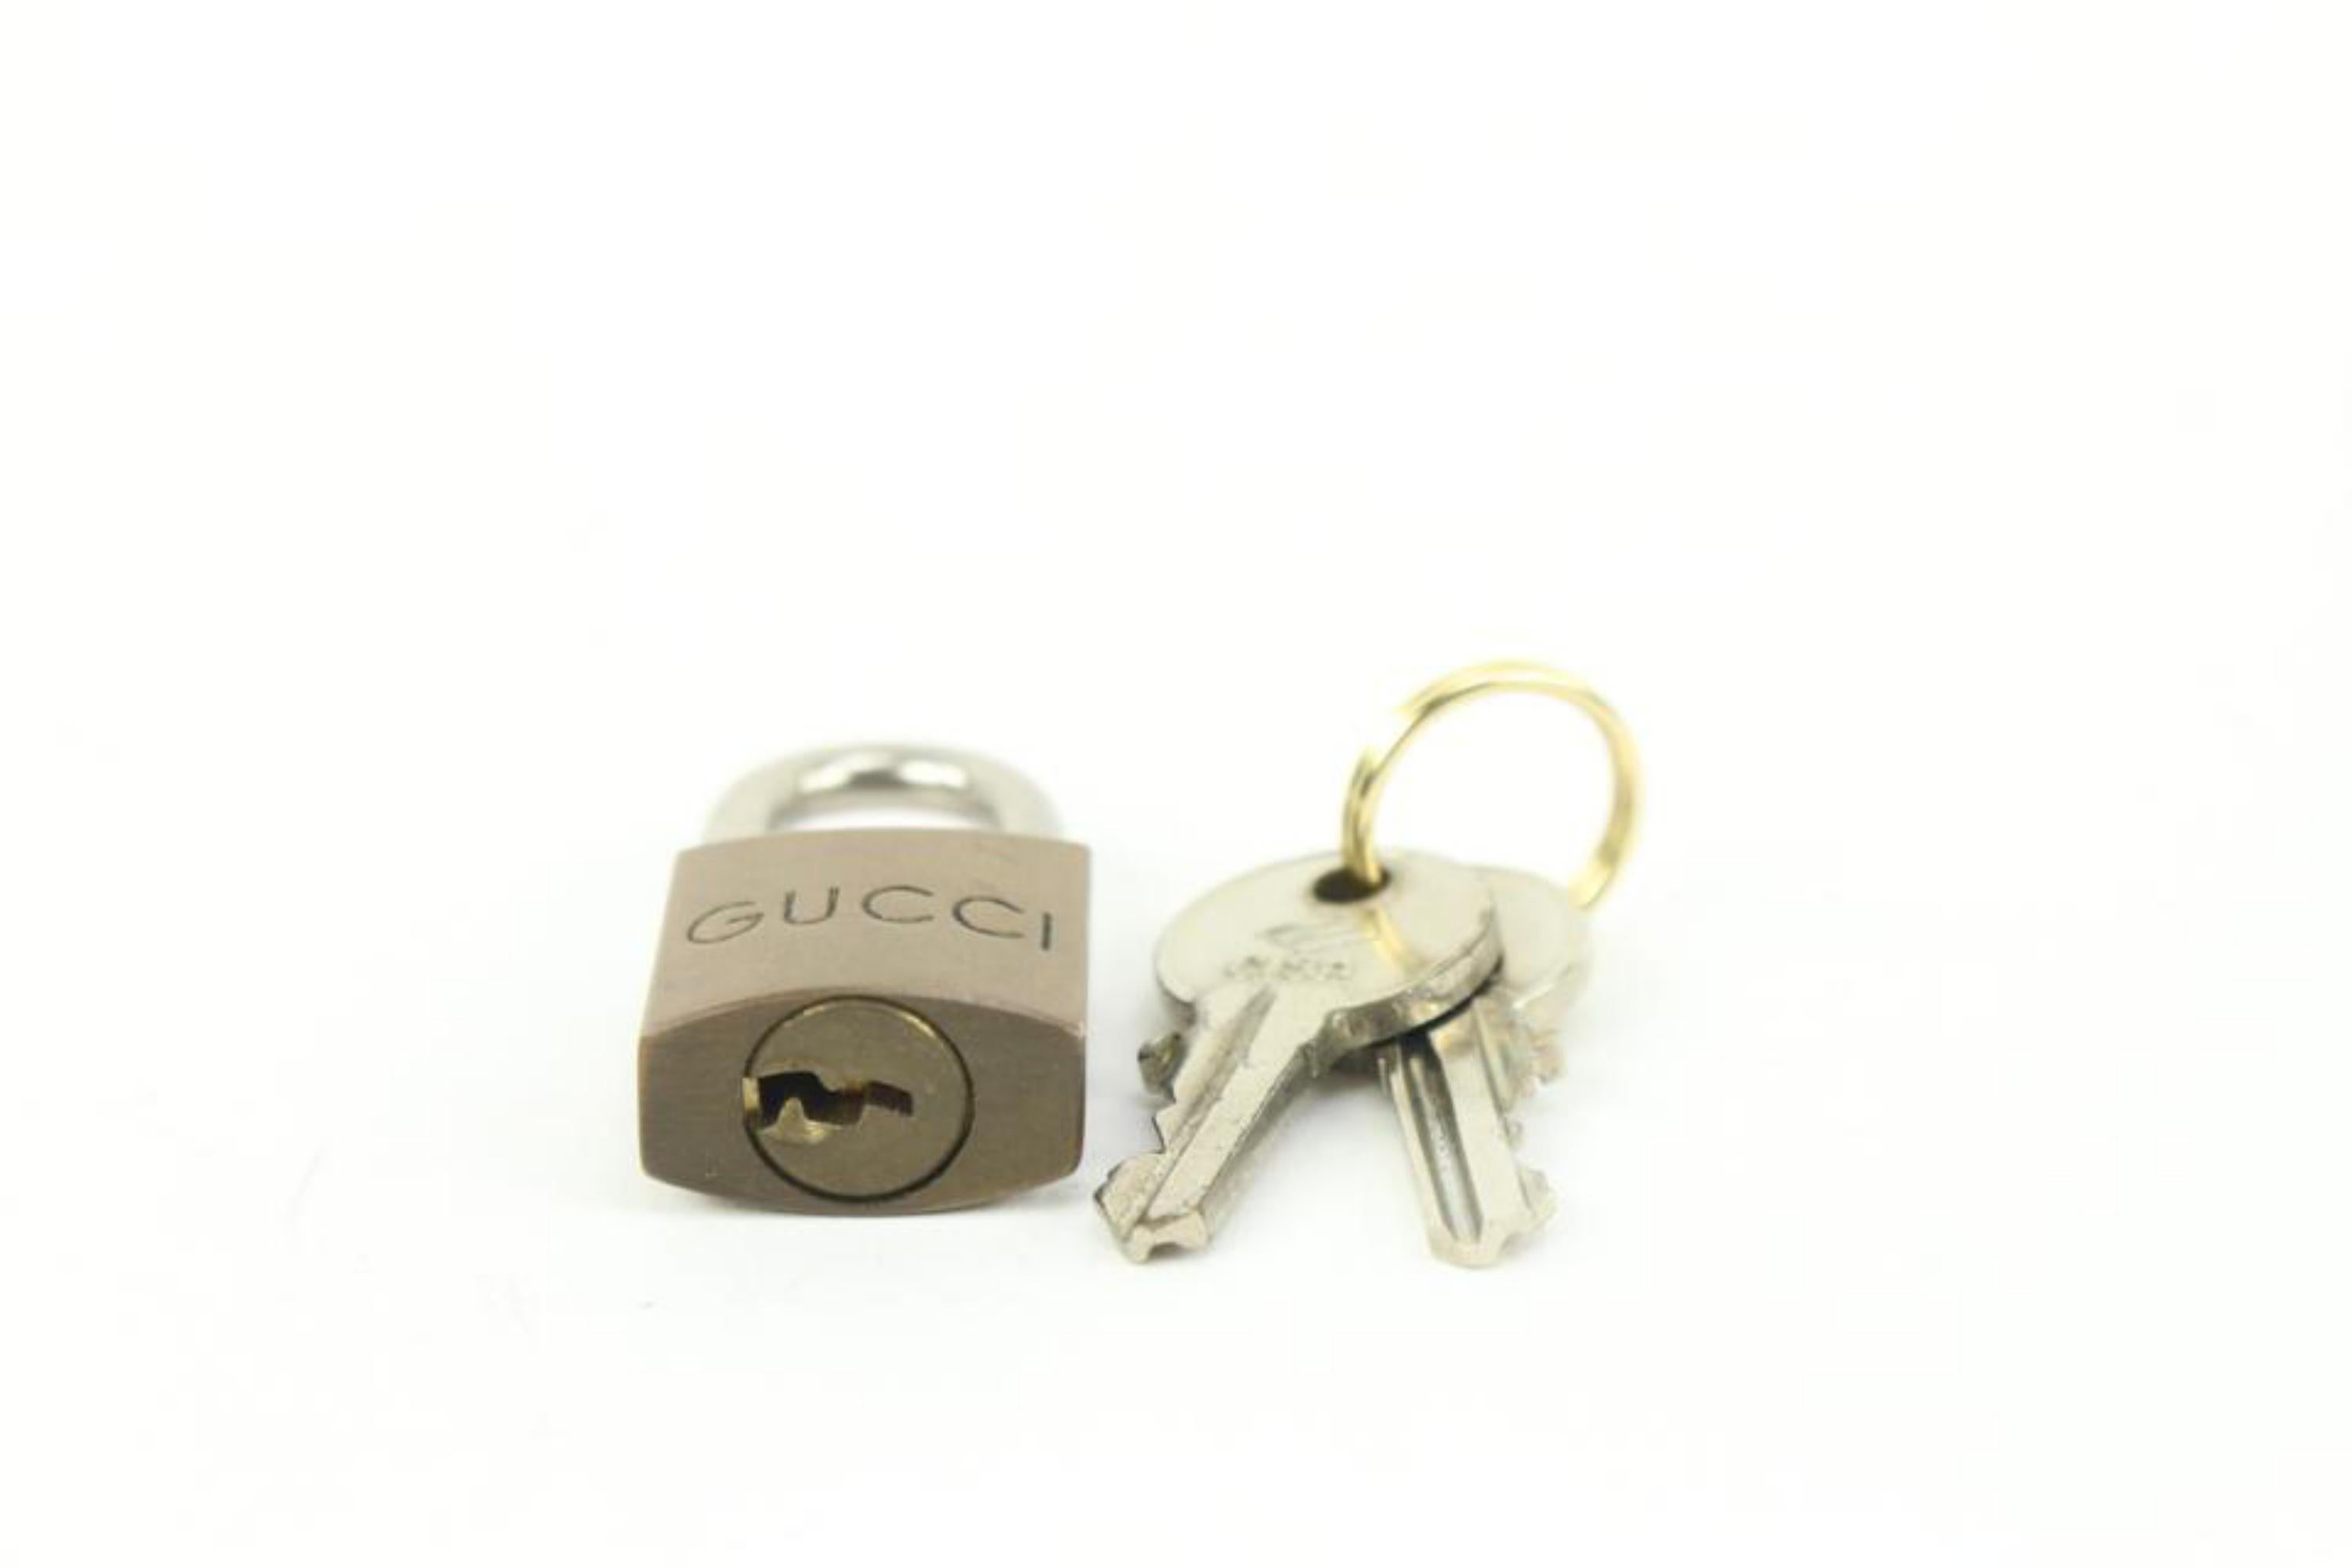 Gucci Vintage Brass Lock and Key Set Cadena Padlock Bag Charm 17g34s In Good Condition In Dix hills, NY